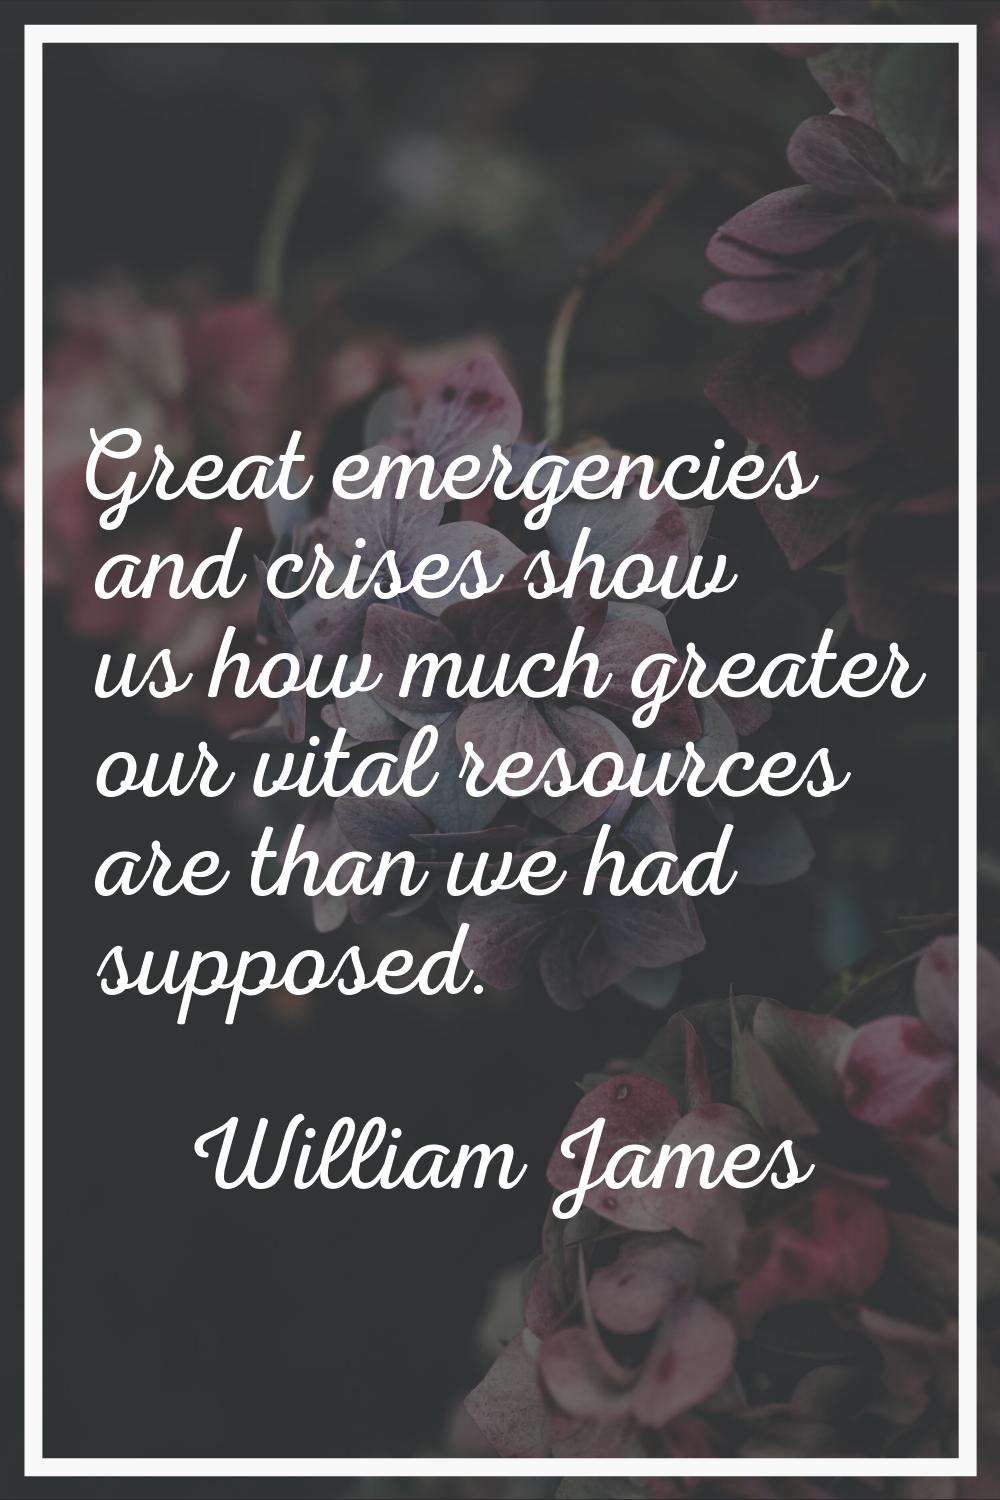 Great emergencies and crises show us how much greater our vital resources are than we had supposed.